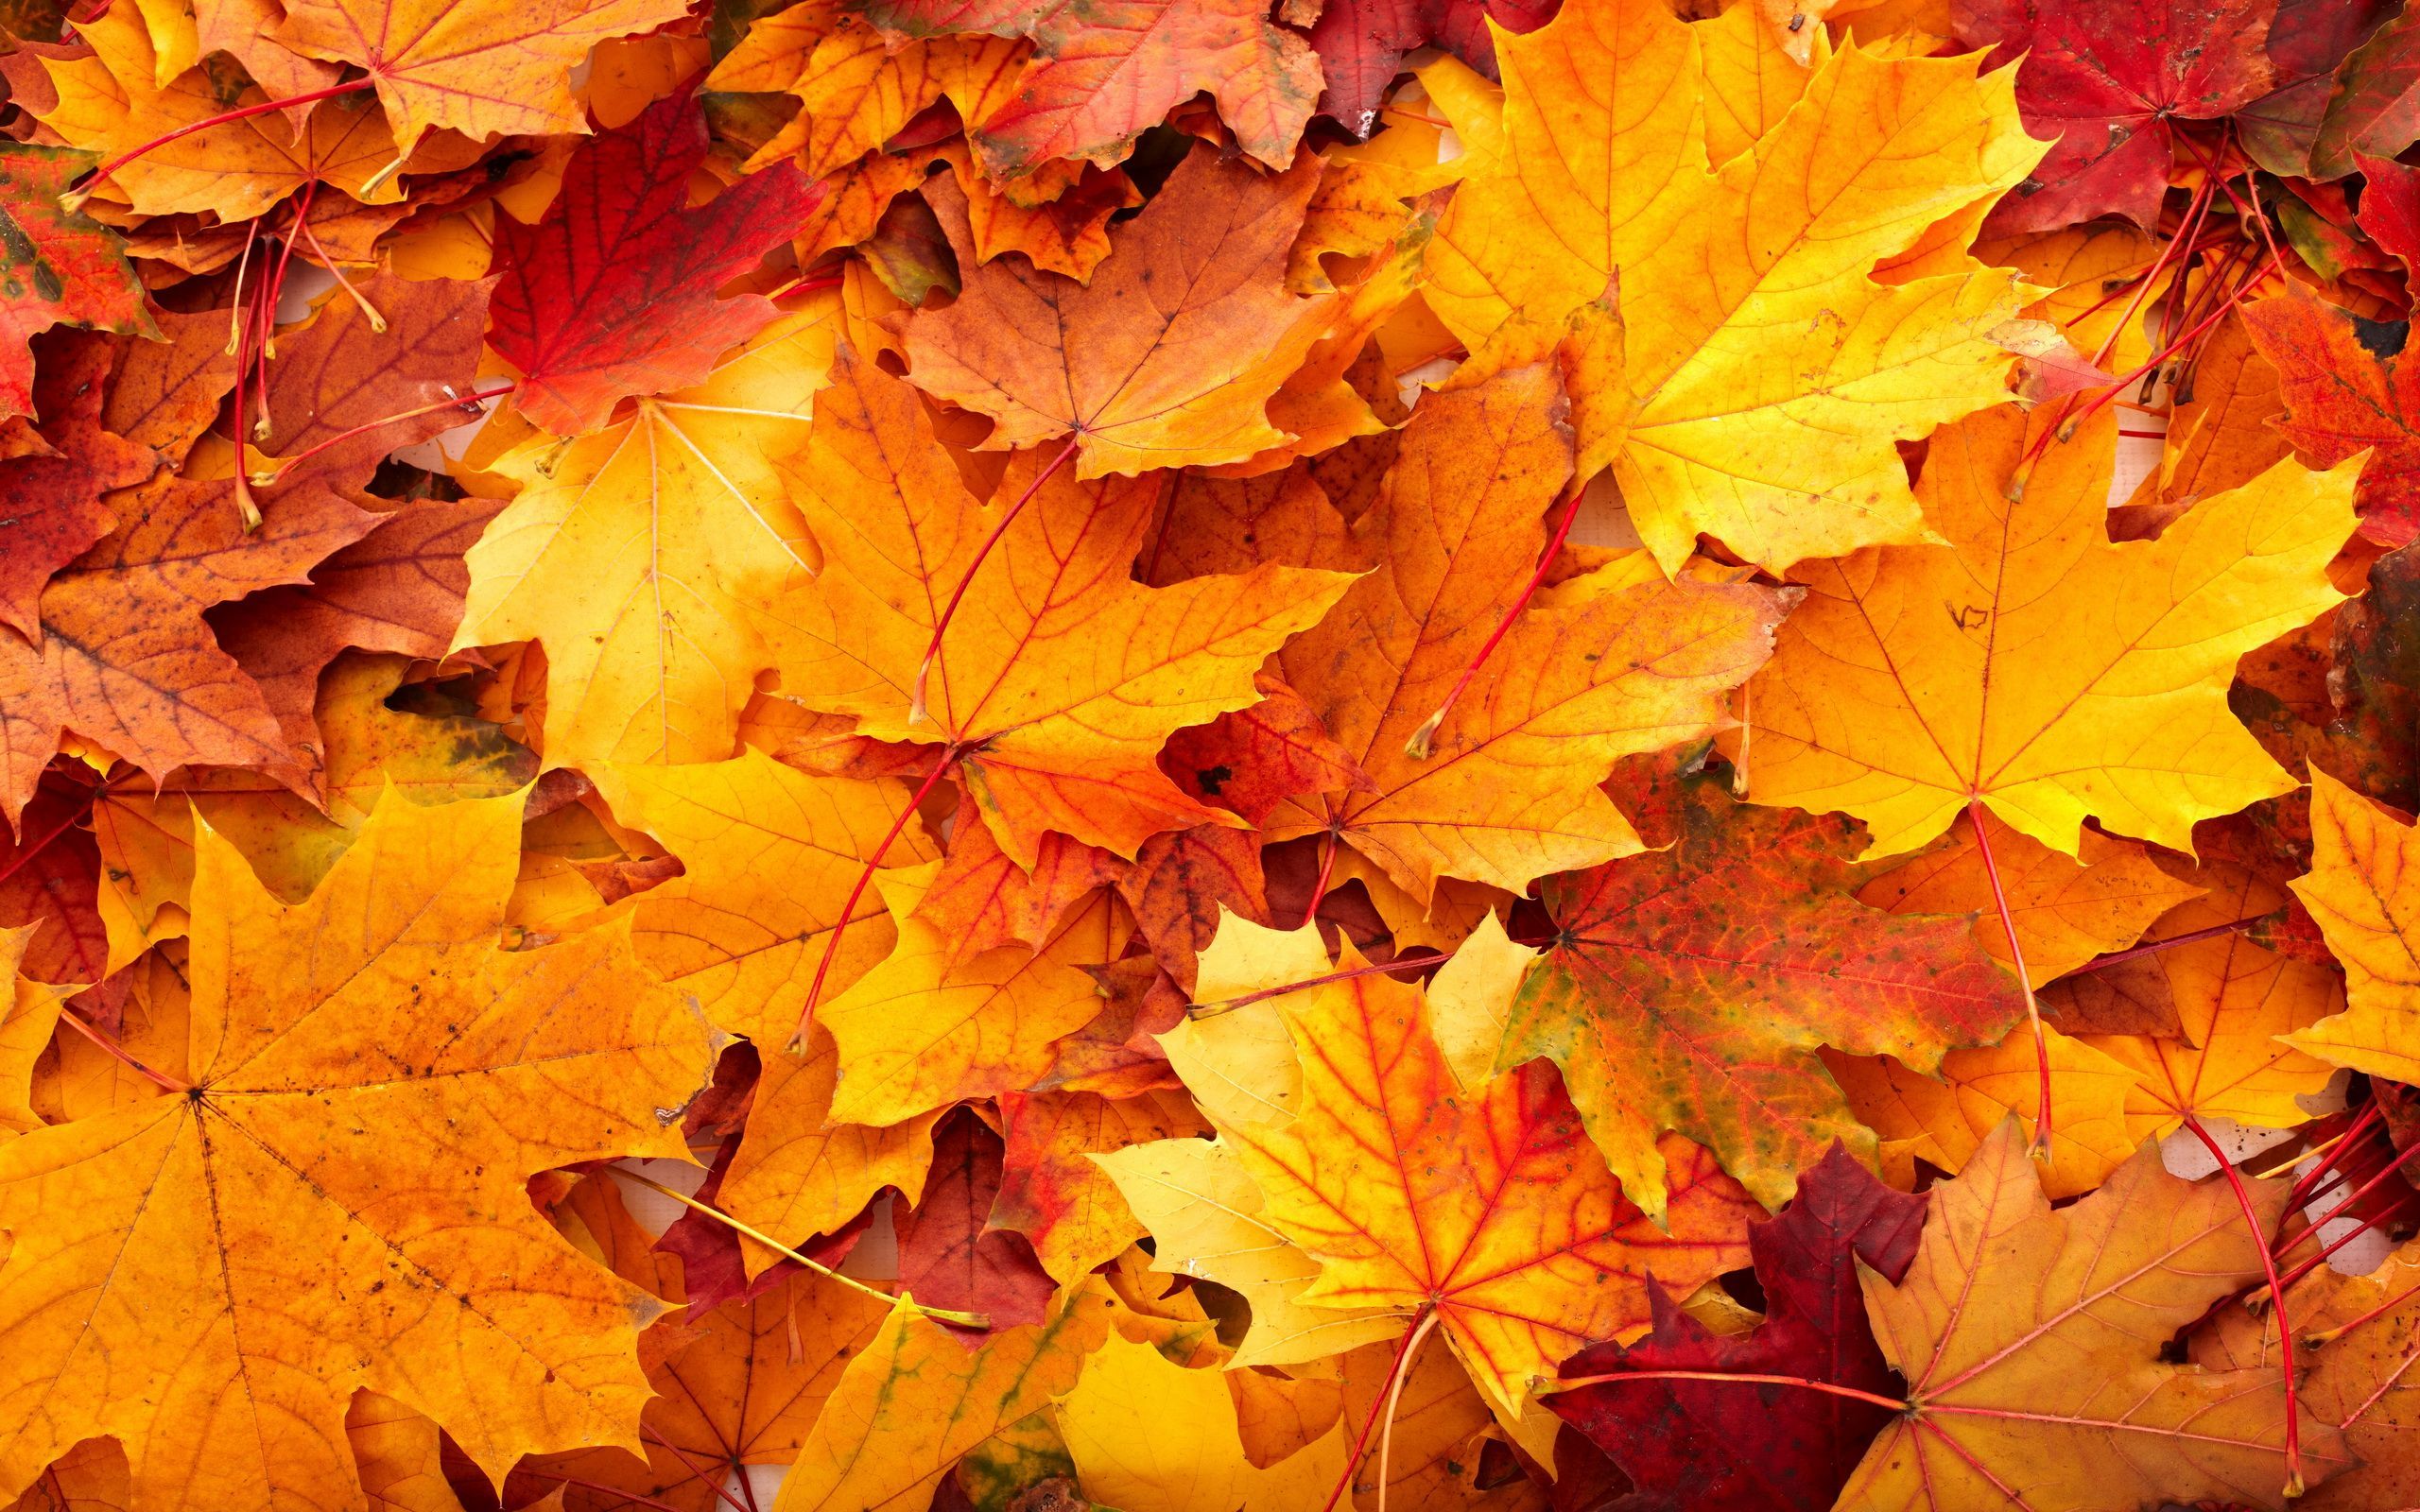 Android Wallpaper: Fall Colors. Fall leaves background, Autumn leaves wallpaper, Fall wallpaper